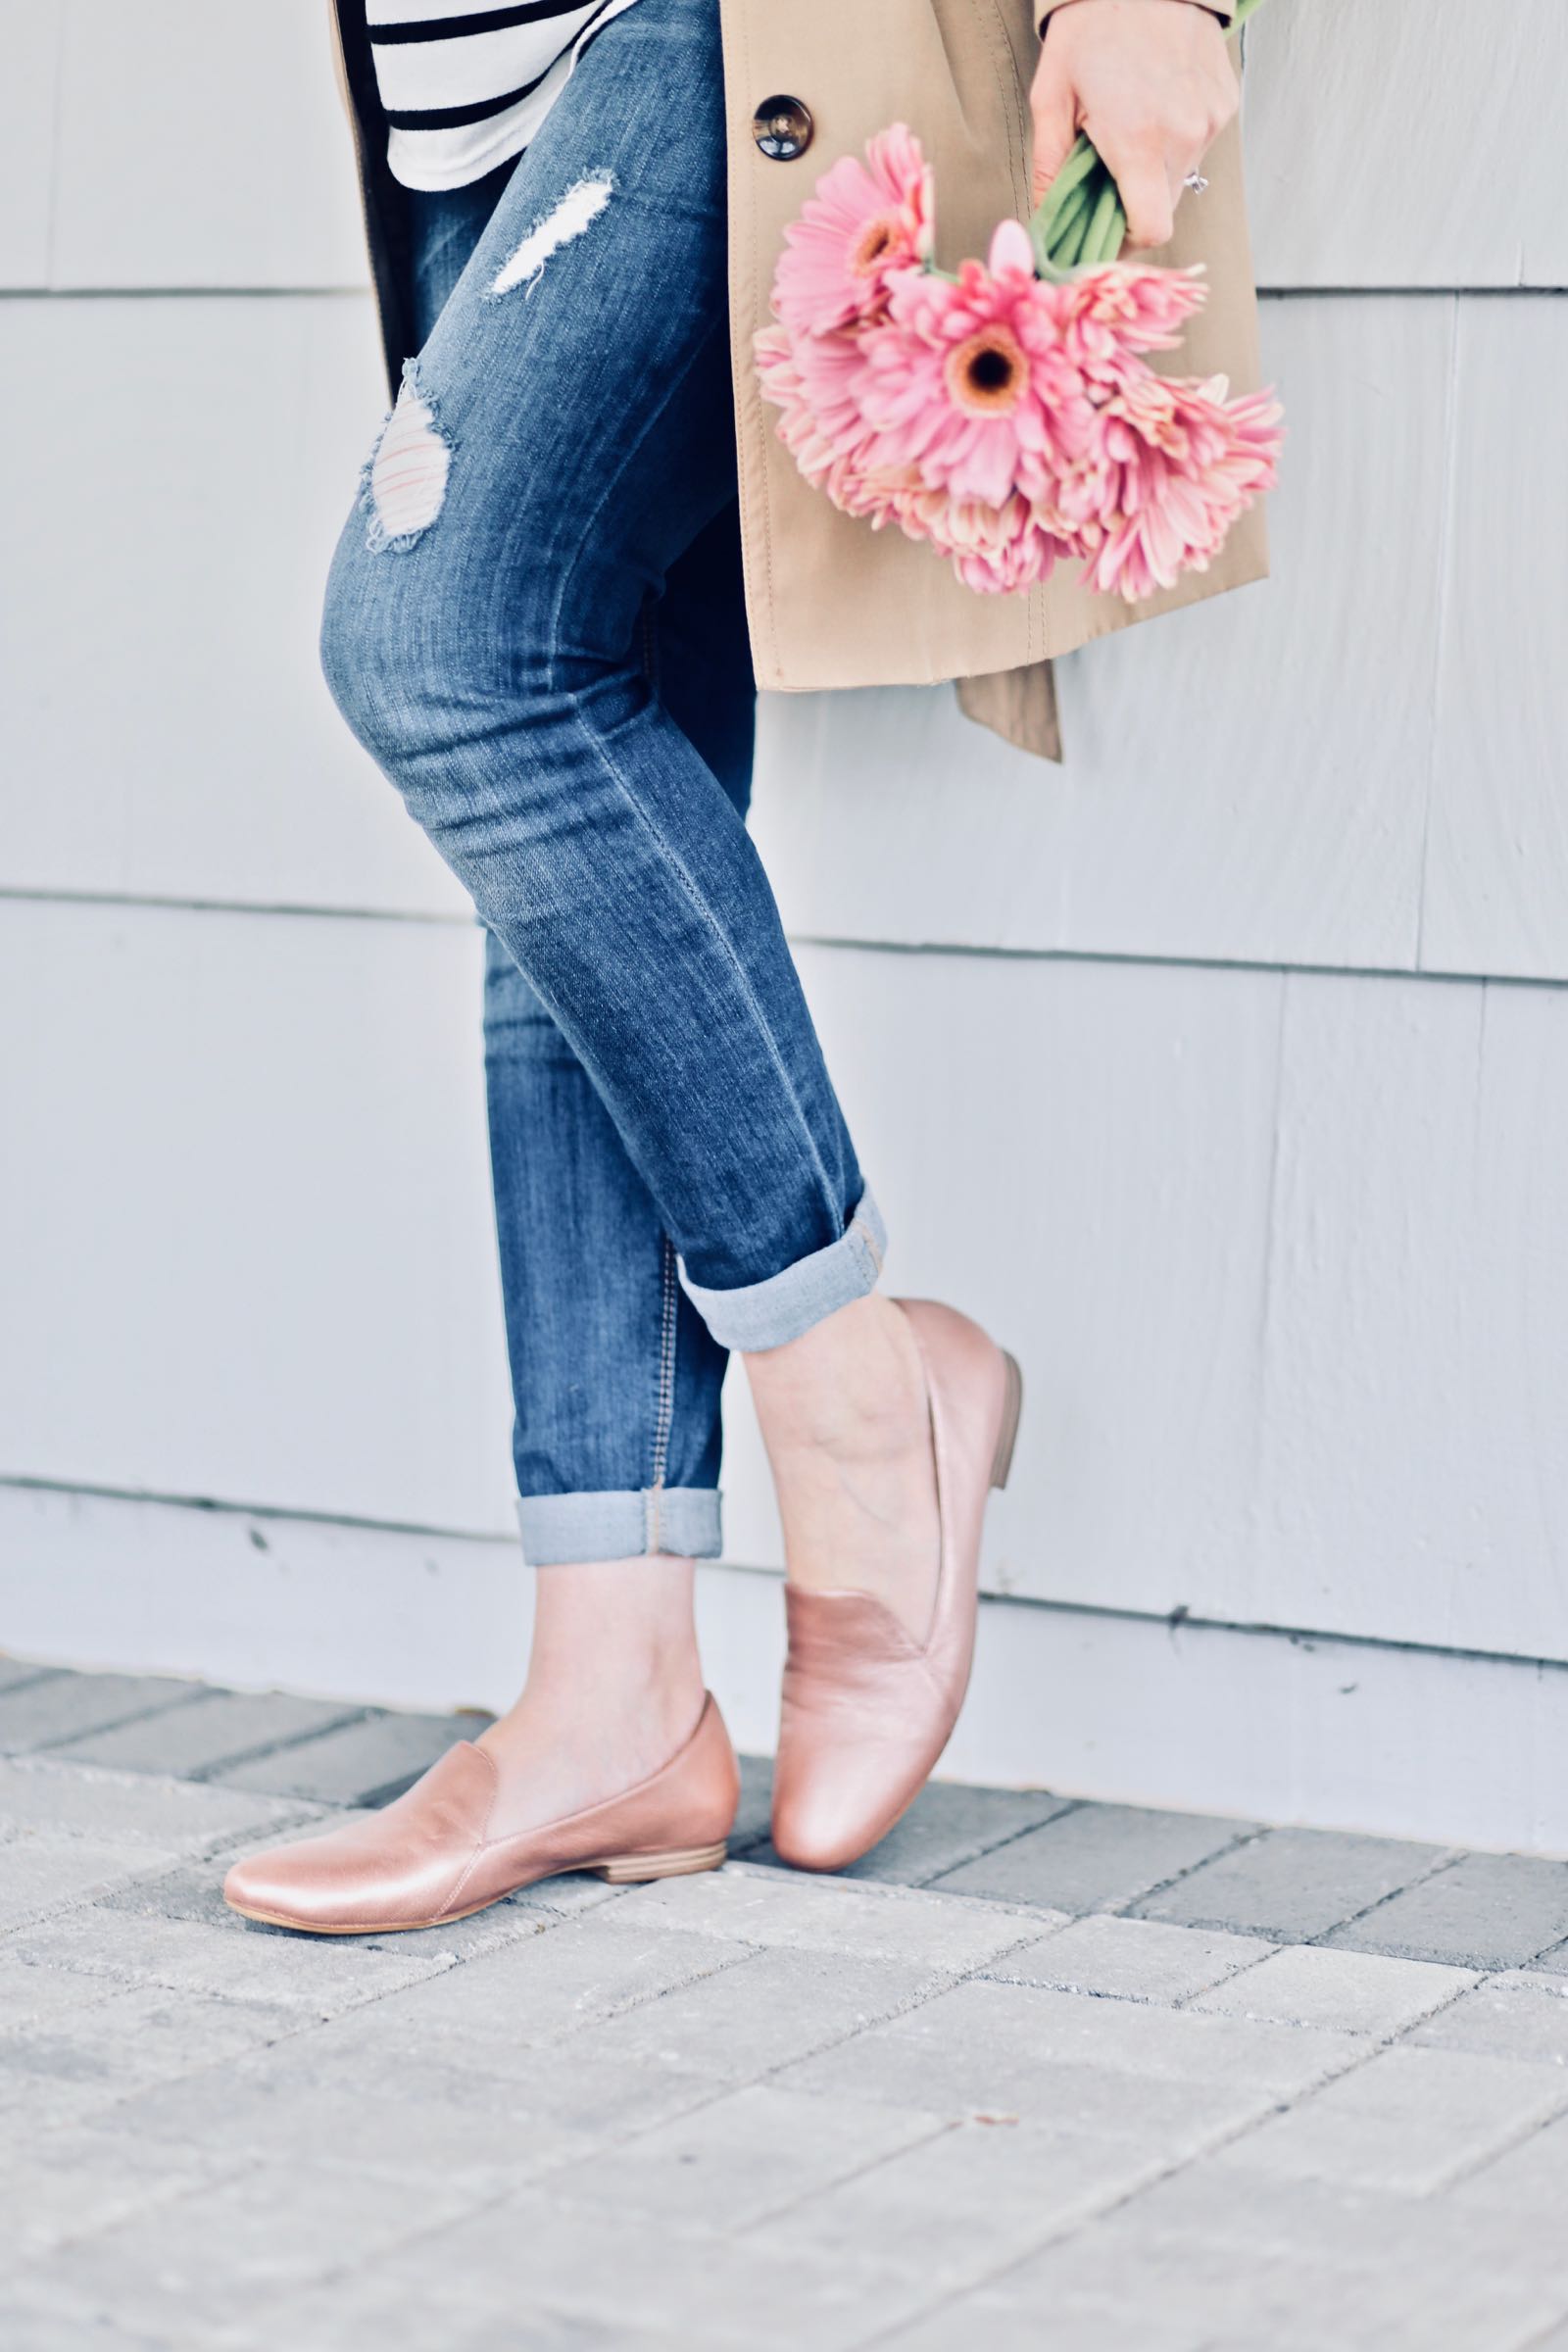 The 'Emiline' by Naturalizer is the perfect blush pink loafer for spring!